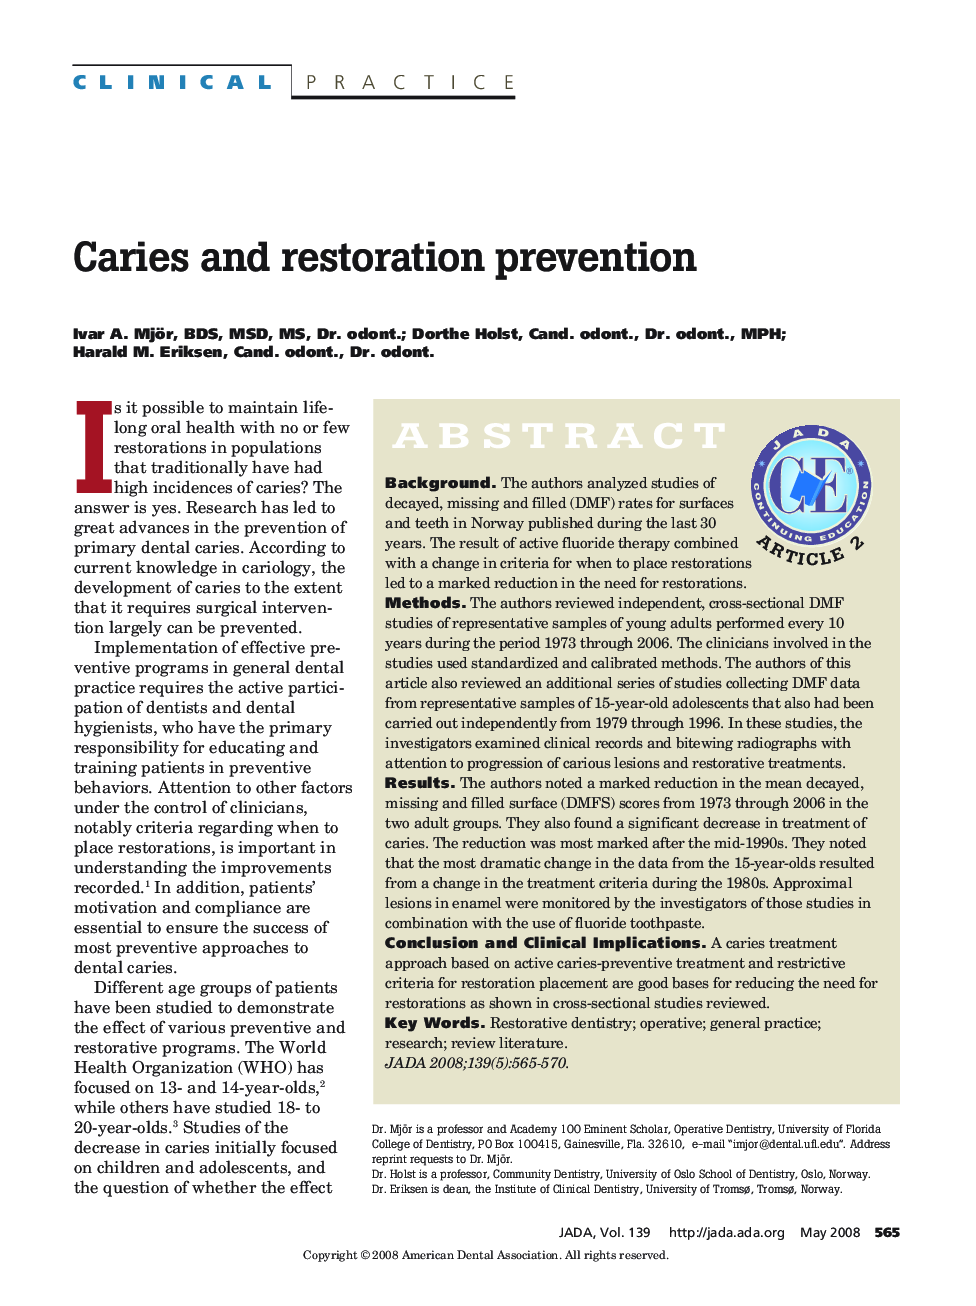 Caries and Restoration Prevention 